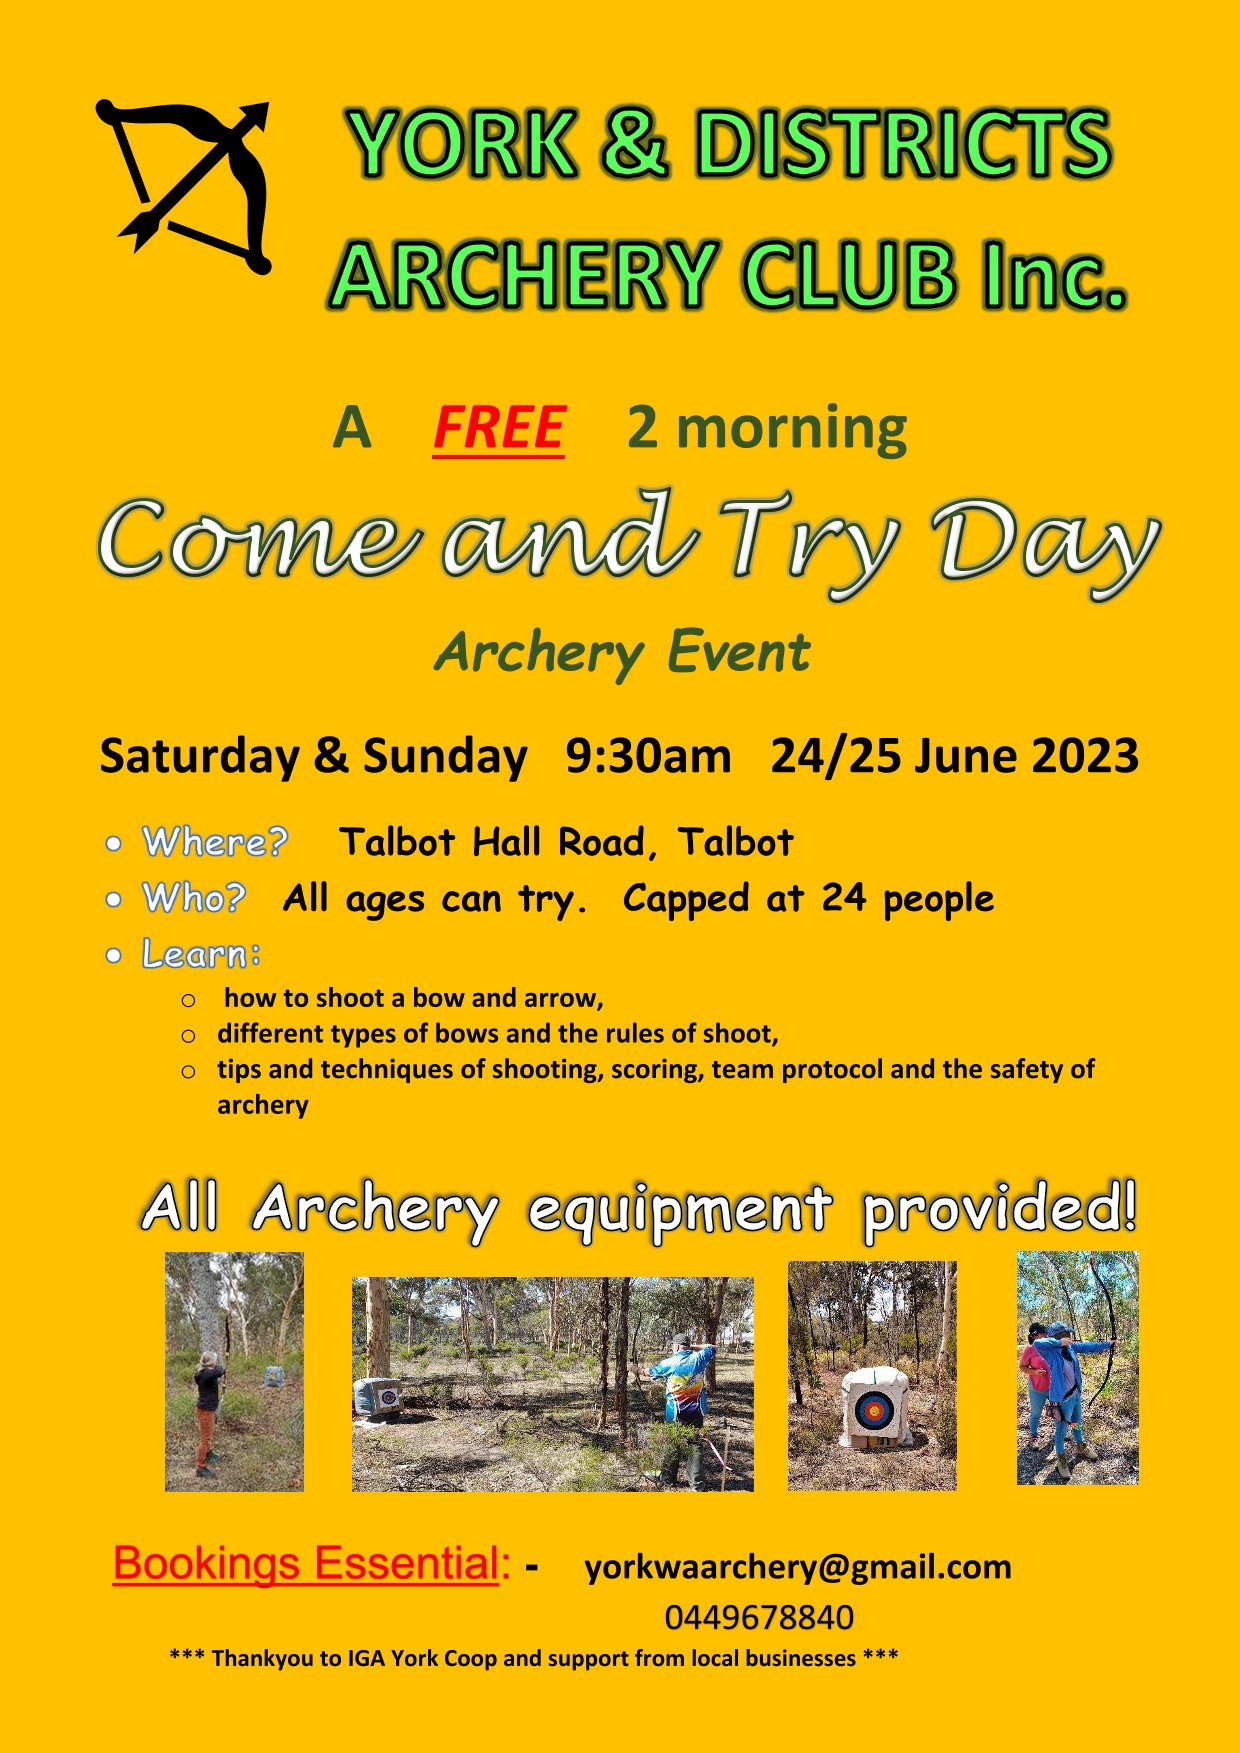 Come & Try Day Events York & Districts Archery Club Inc.